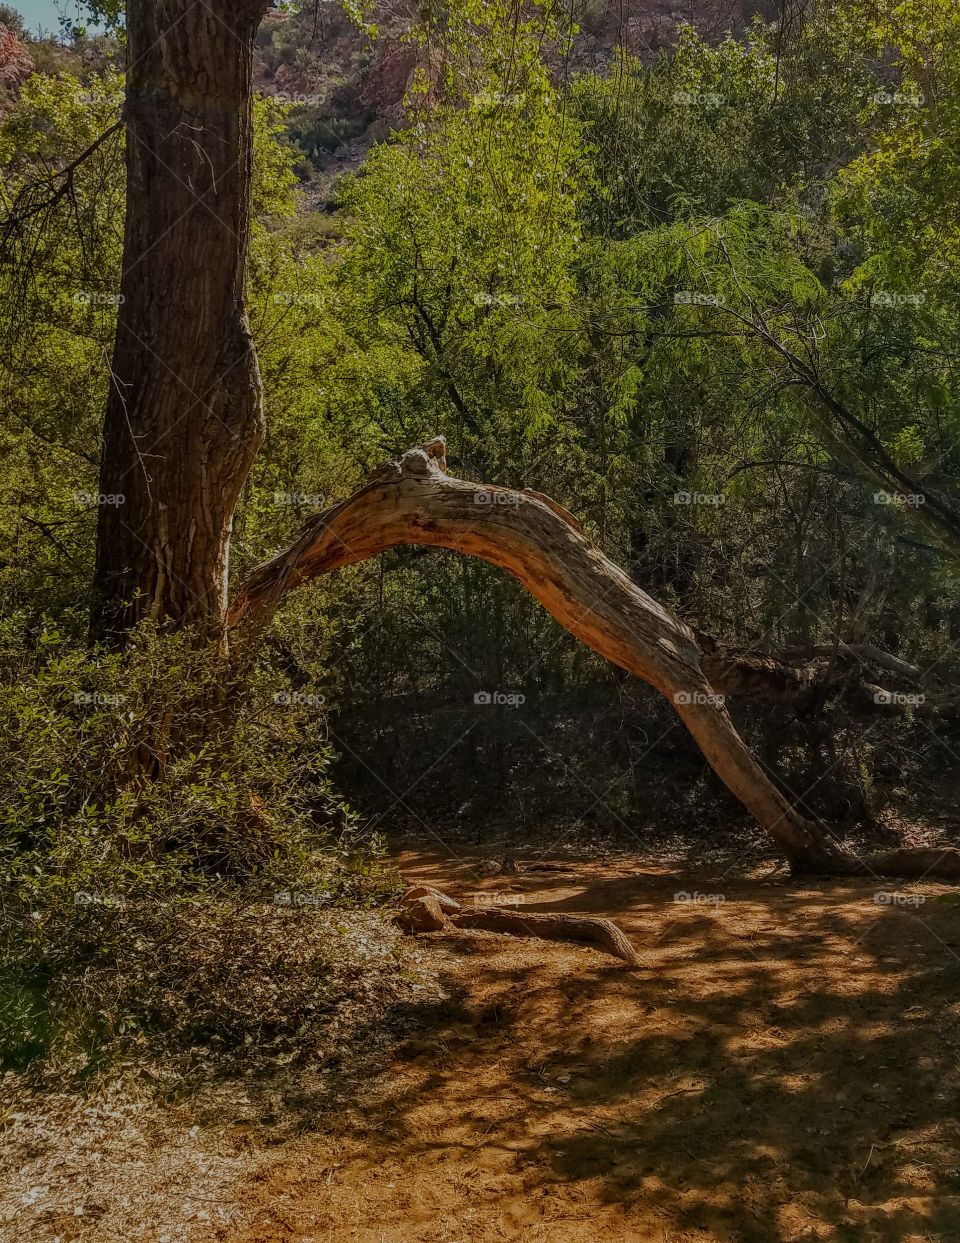 A unique tree grows along the trail.